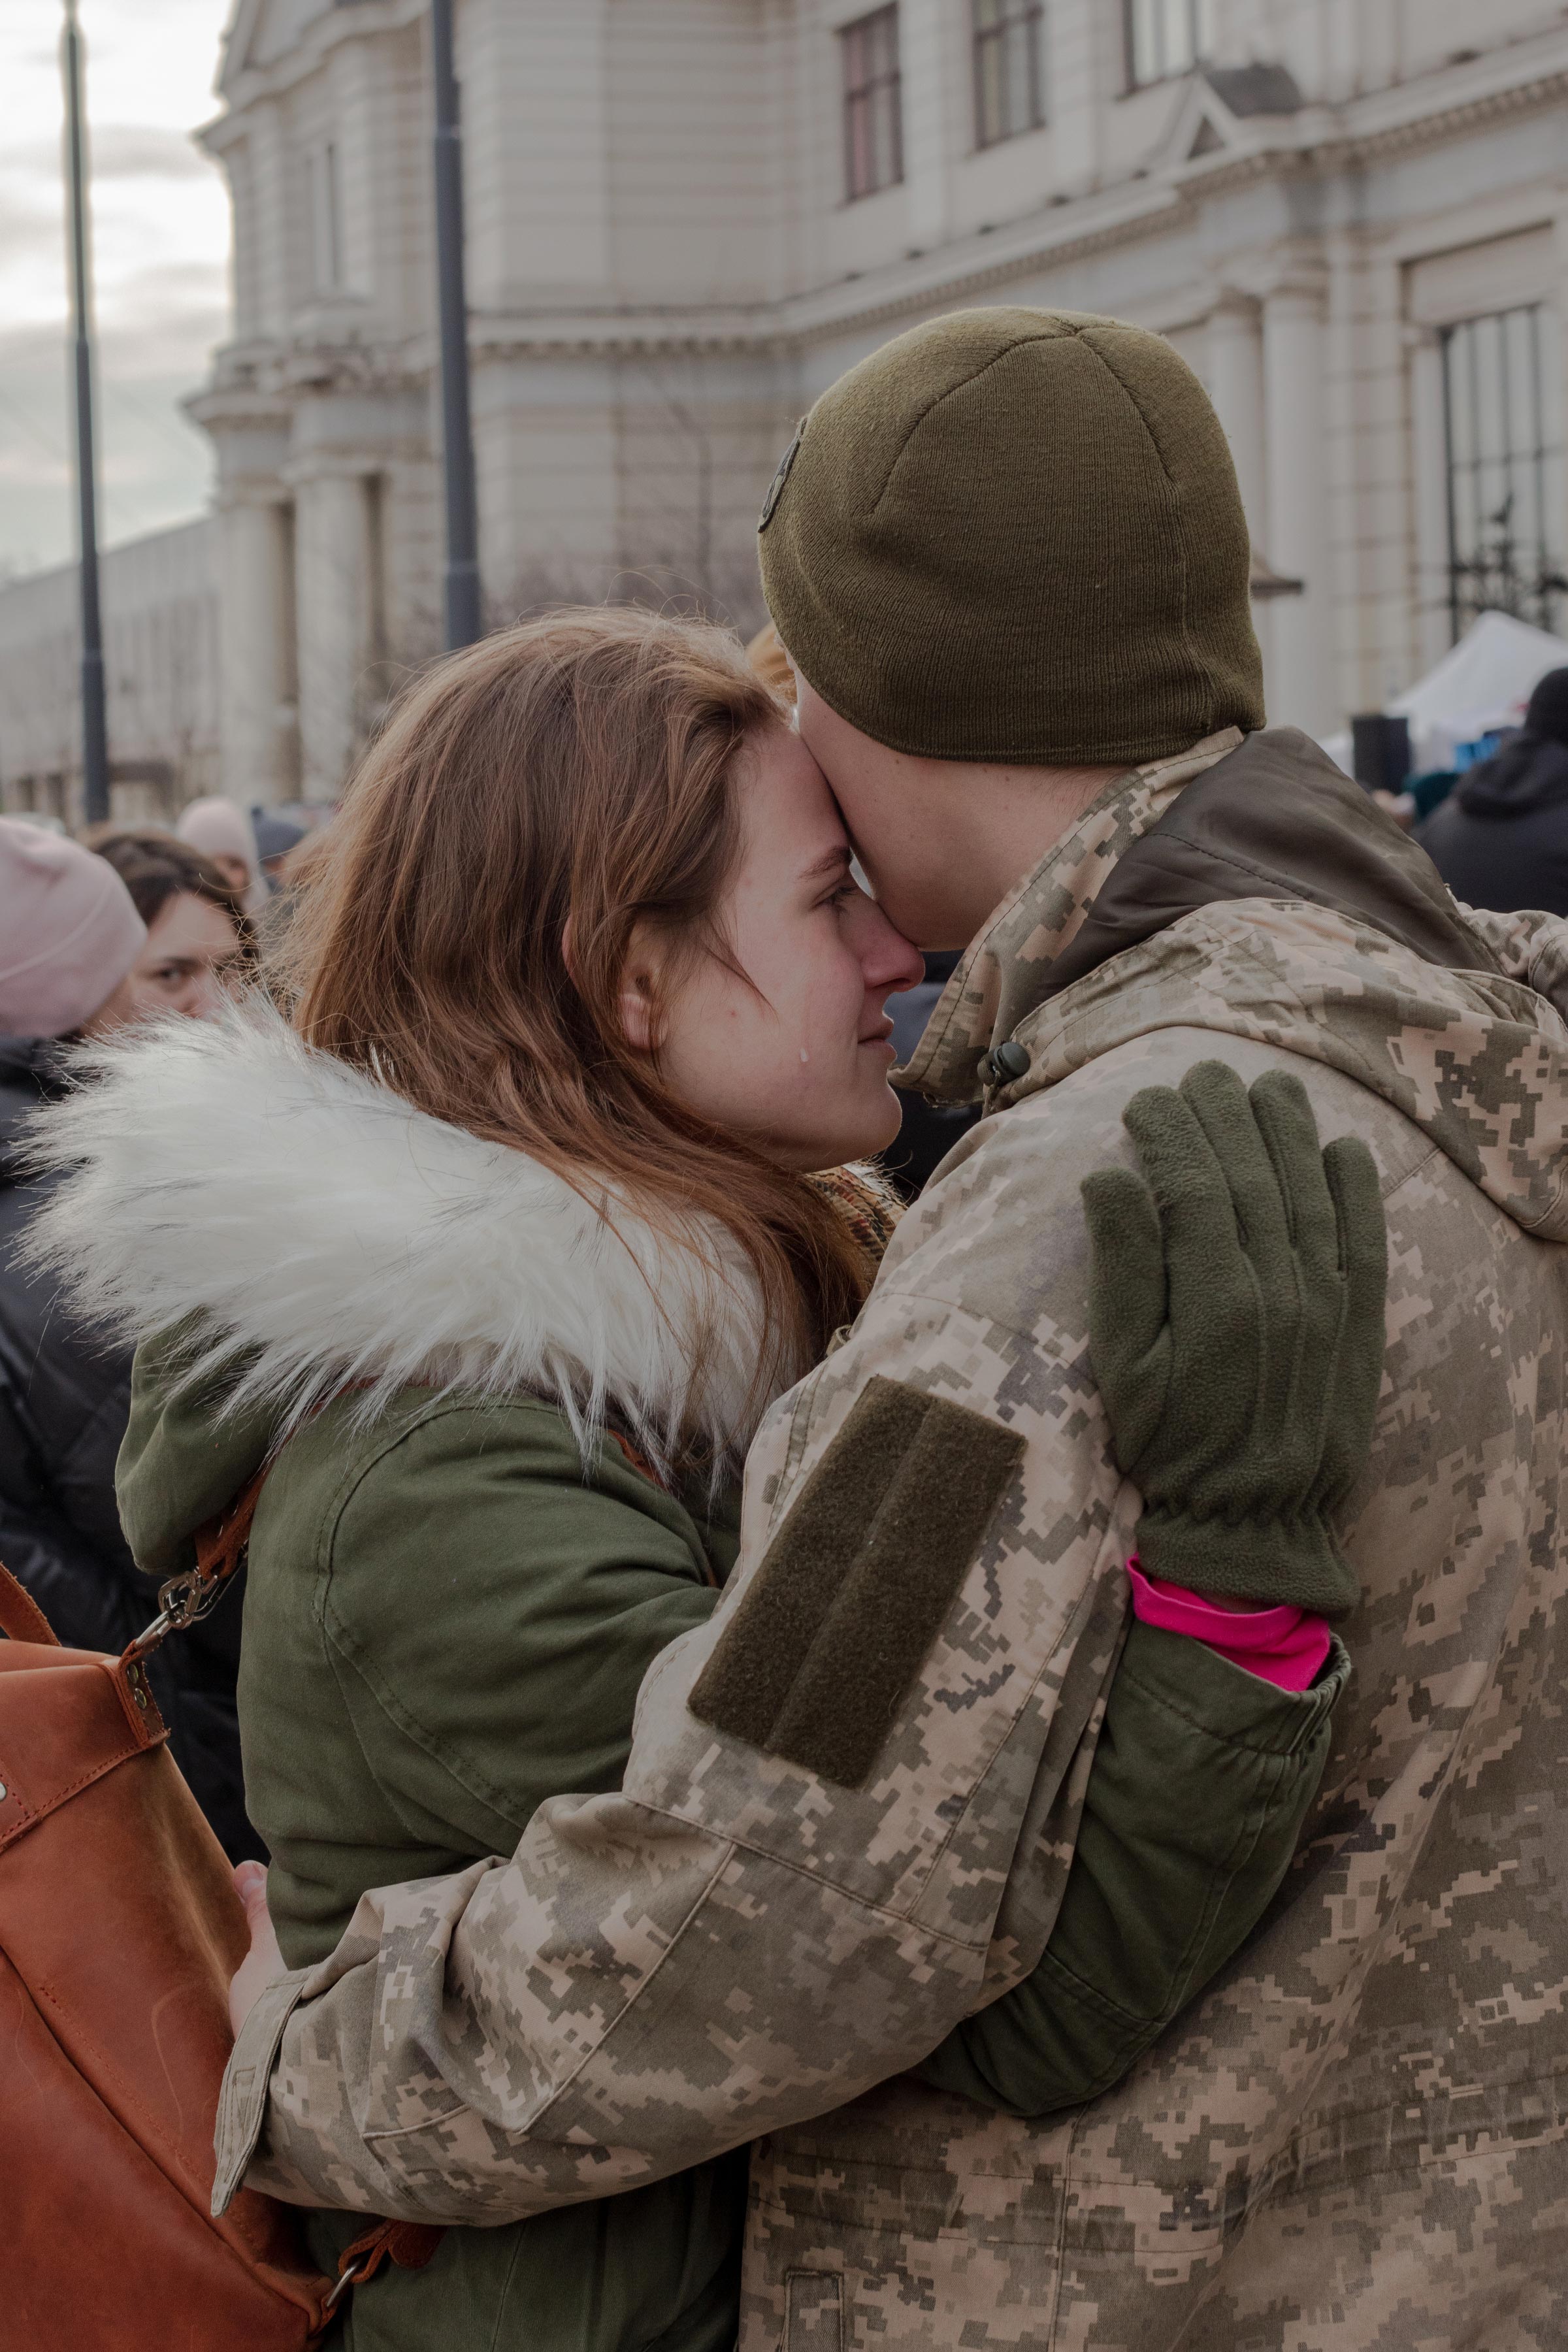 Soldiers say emotional goodbyes to their partners at the Lviv train station before heading to the front lines on March 8. (Natalie Keyssar for TIME)